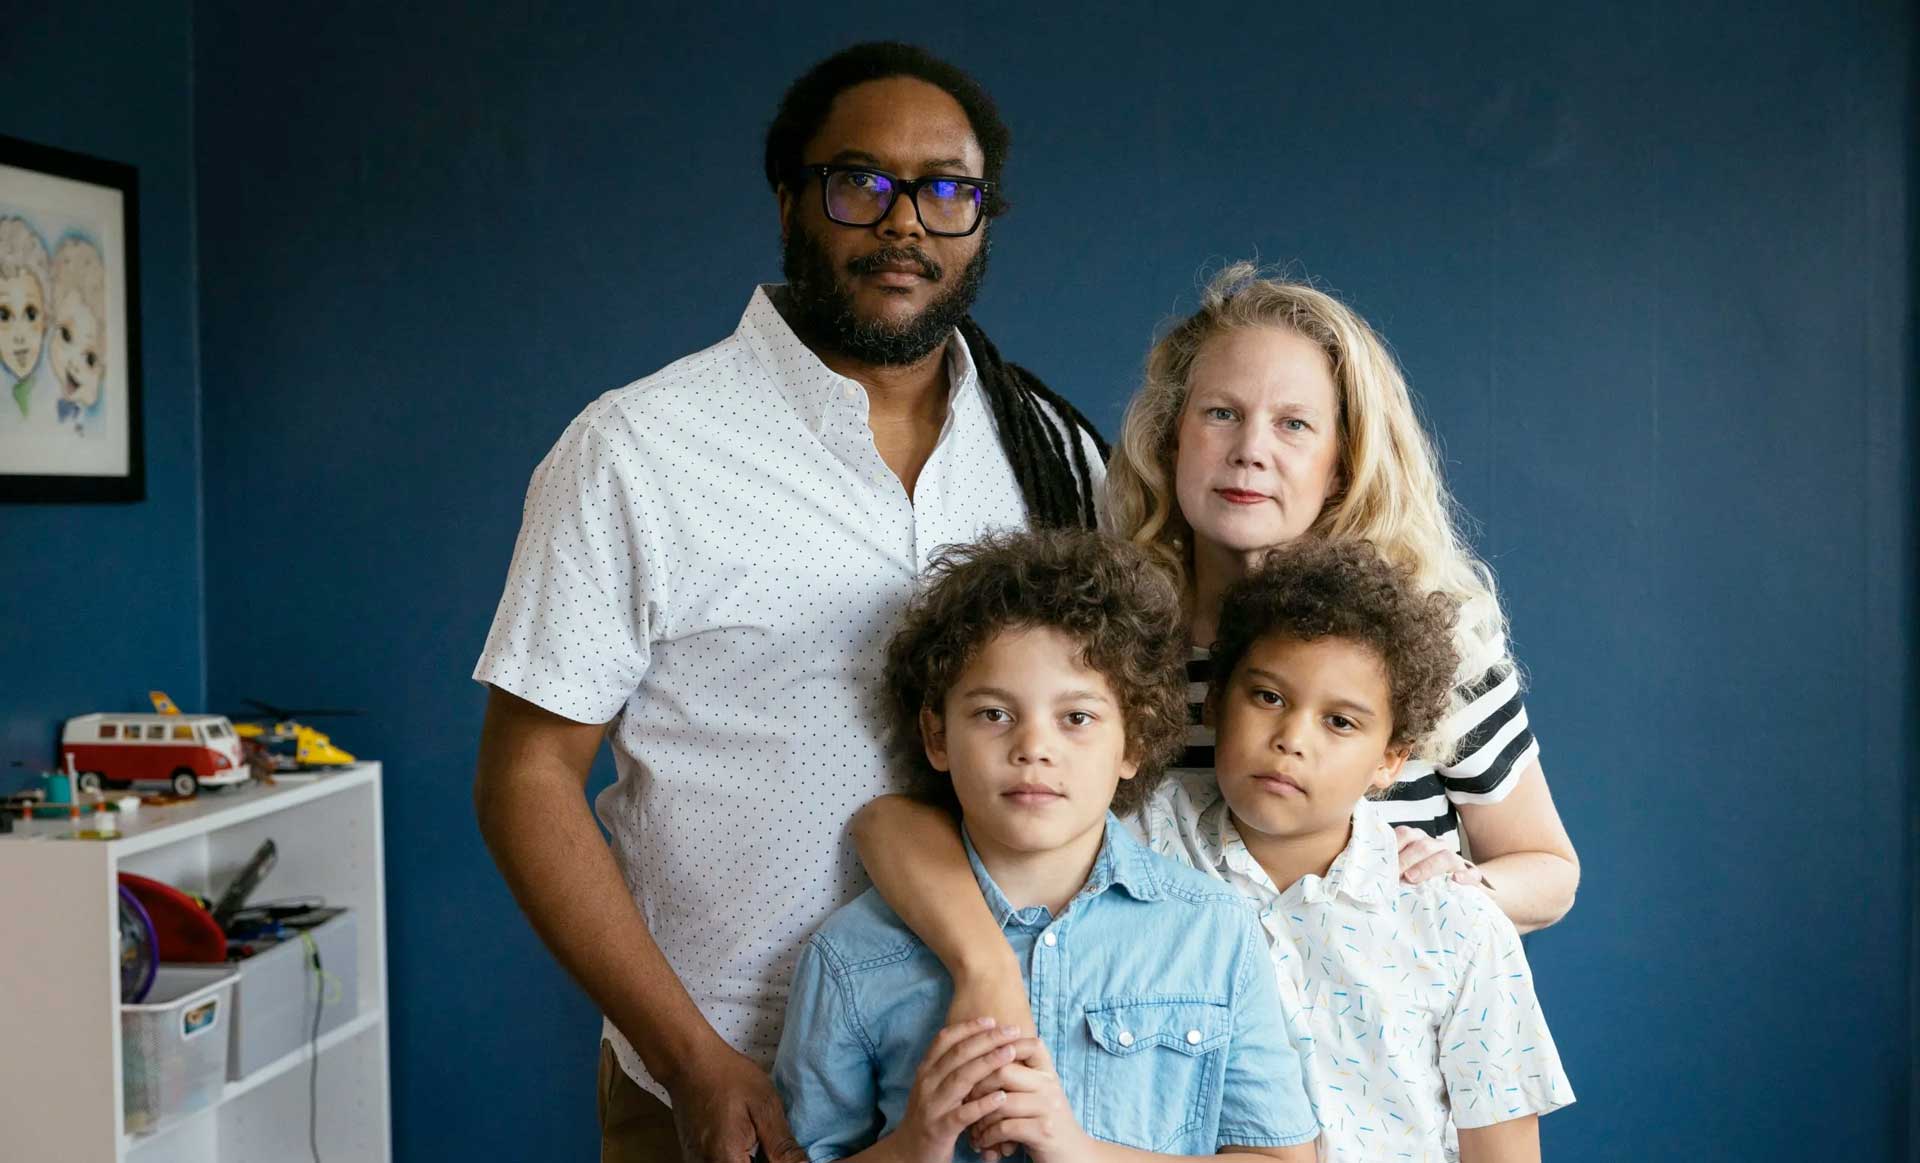 Marcus and Allyson Ward of Chicago moved across the country to be closer to family after the premature birth of their twins, Milo and Theo, left them with about $80,000 in medical debt. (Taylor Glascock for KHN and NPR)